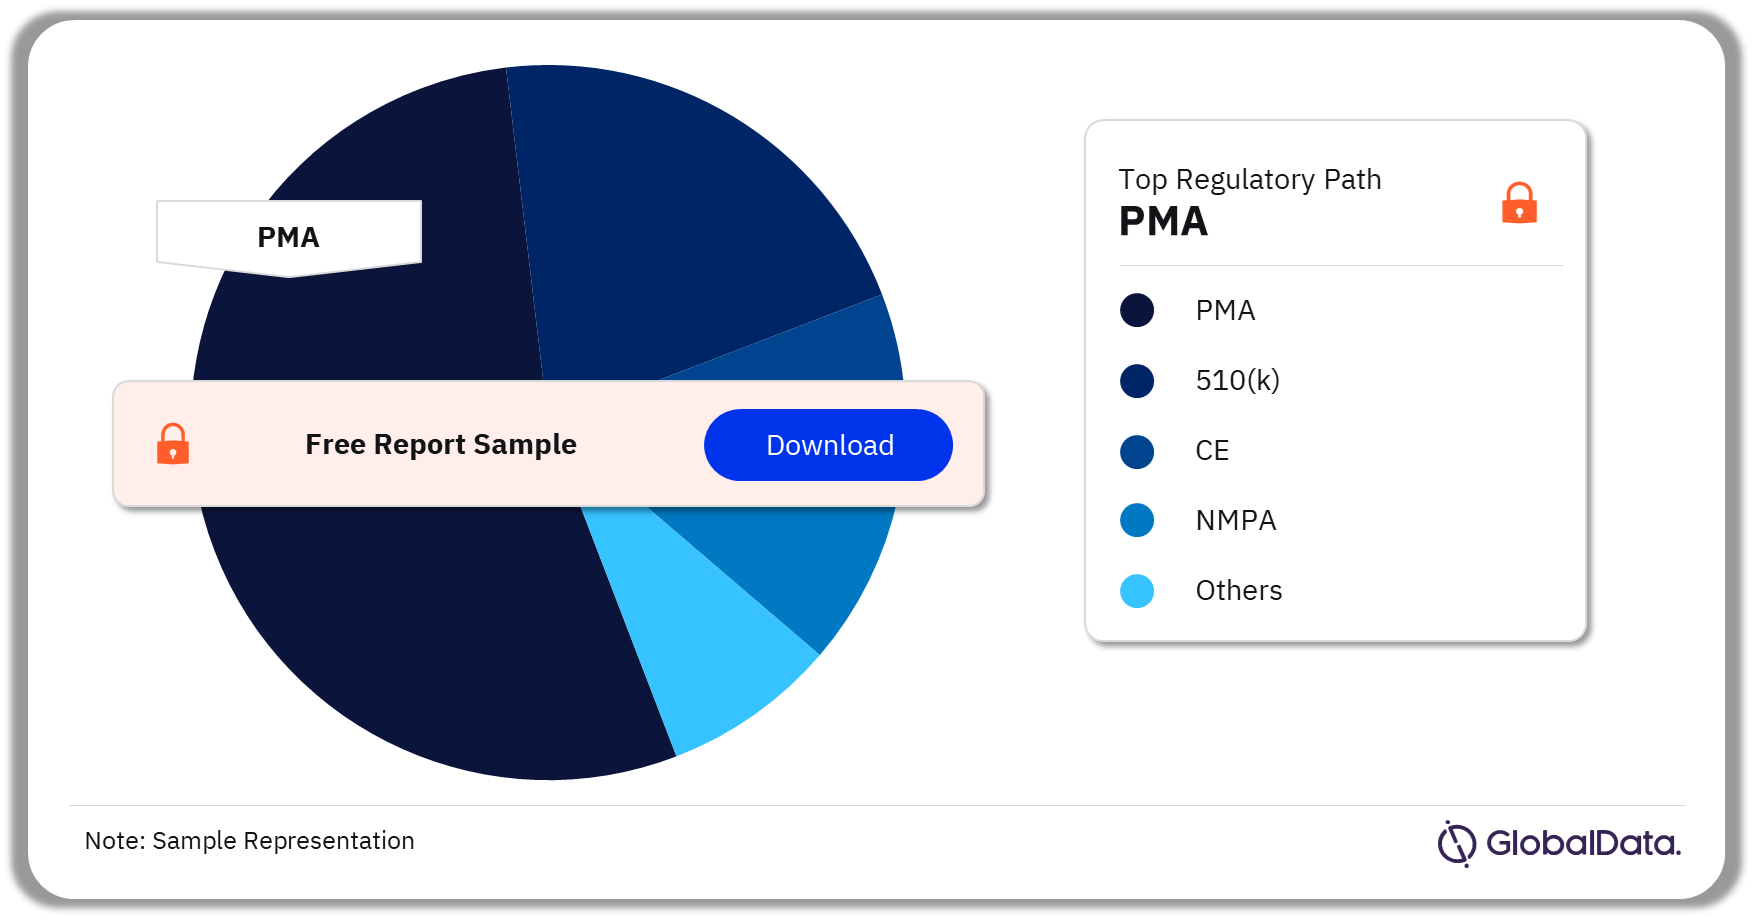 Glaucoma Surgery Devices Pipeline Market Analysis by Regulatory Paths, 2023 (%)